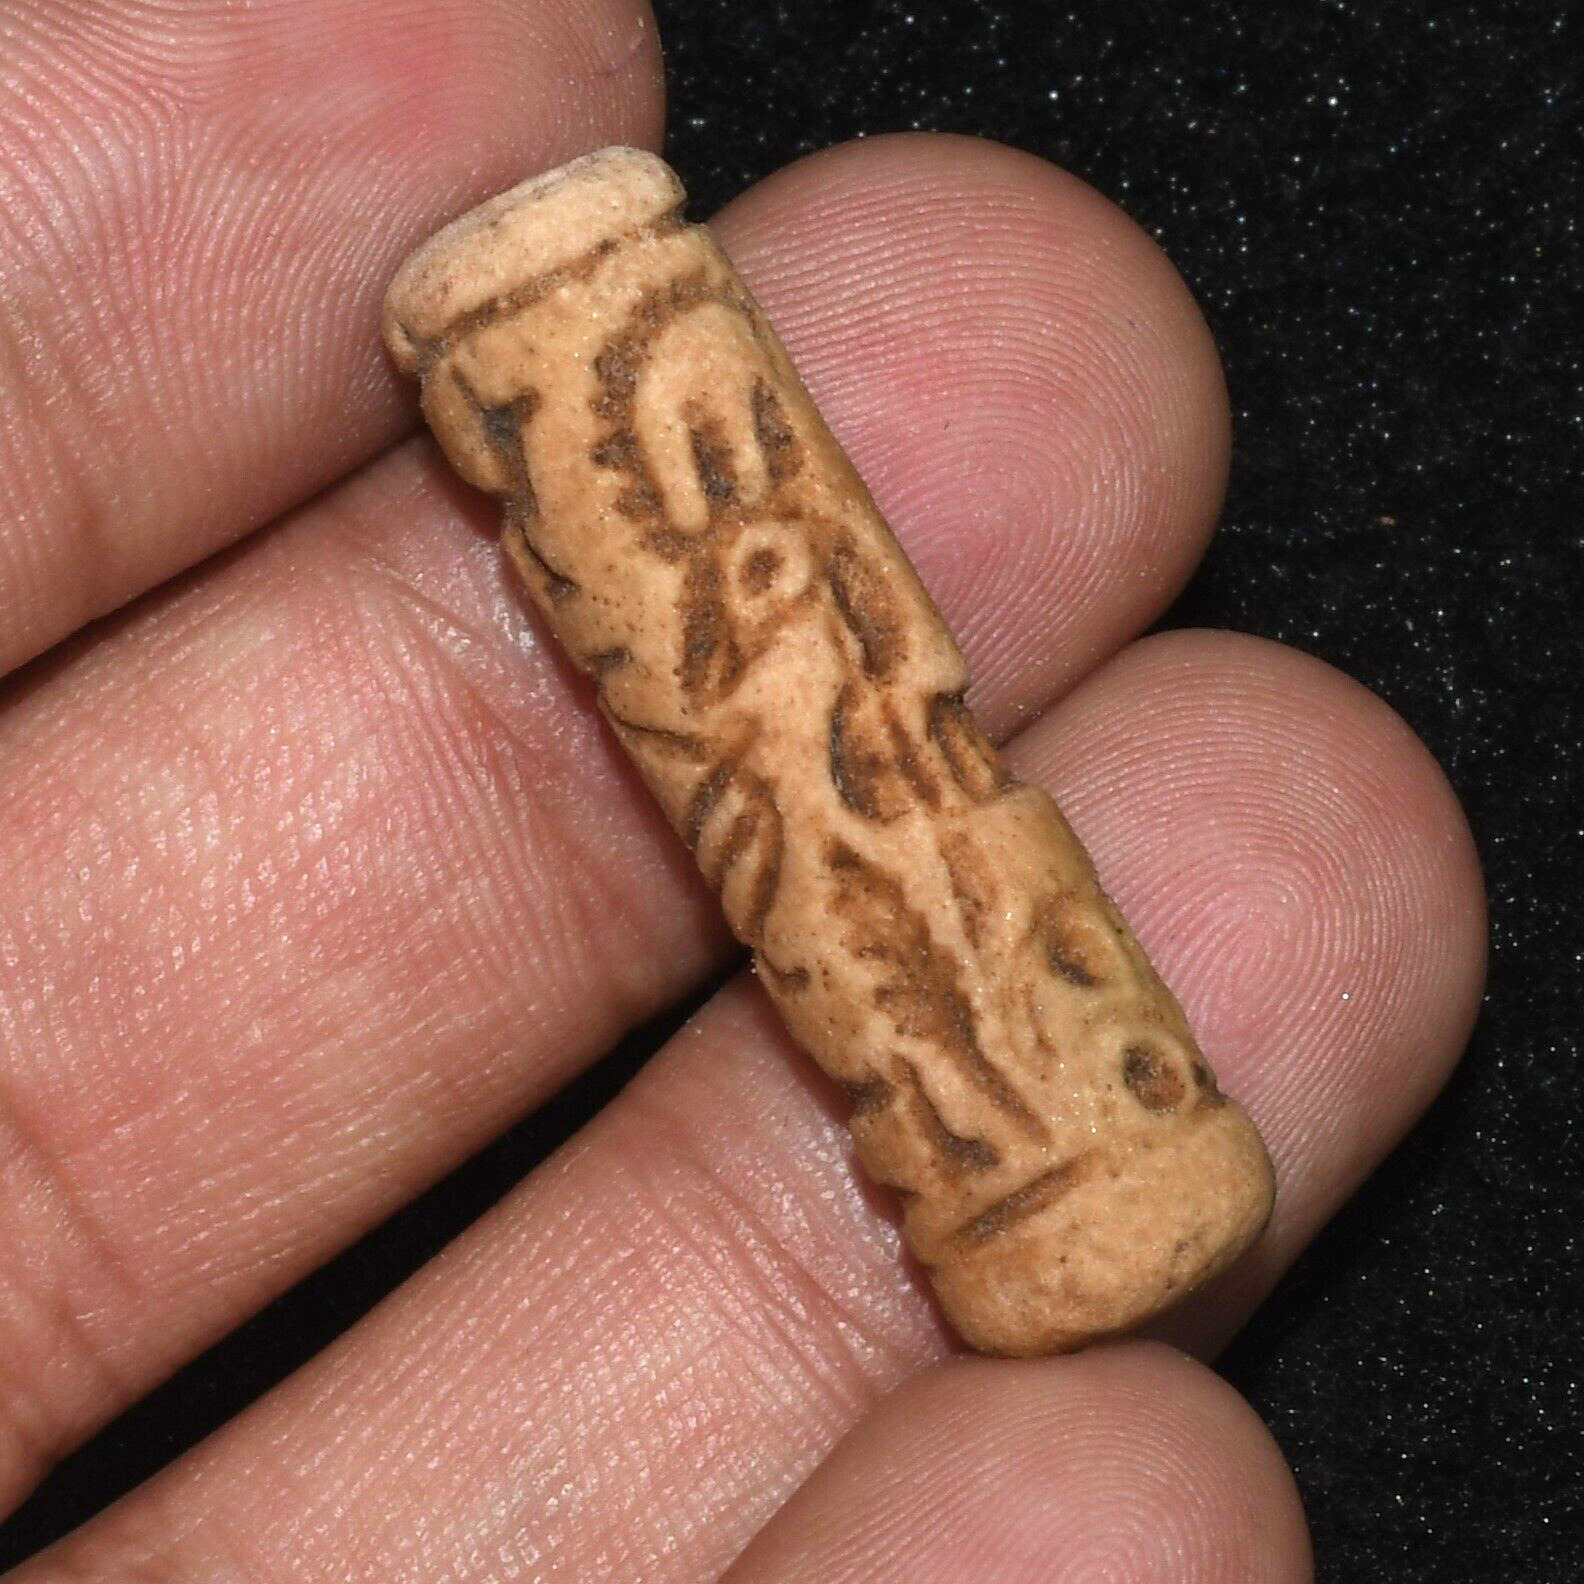 Genuine Ancient Middle Eastern Ceramic Cylinder Seal Bead Ca. 2nd millennium BC